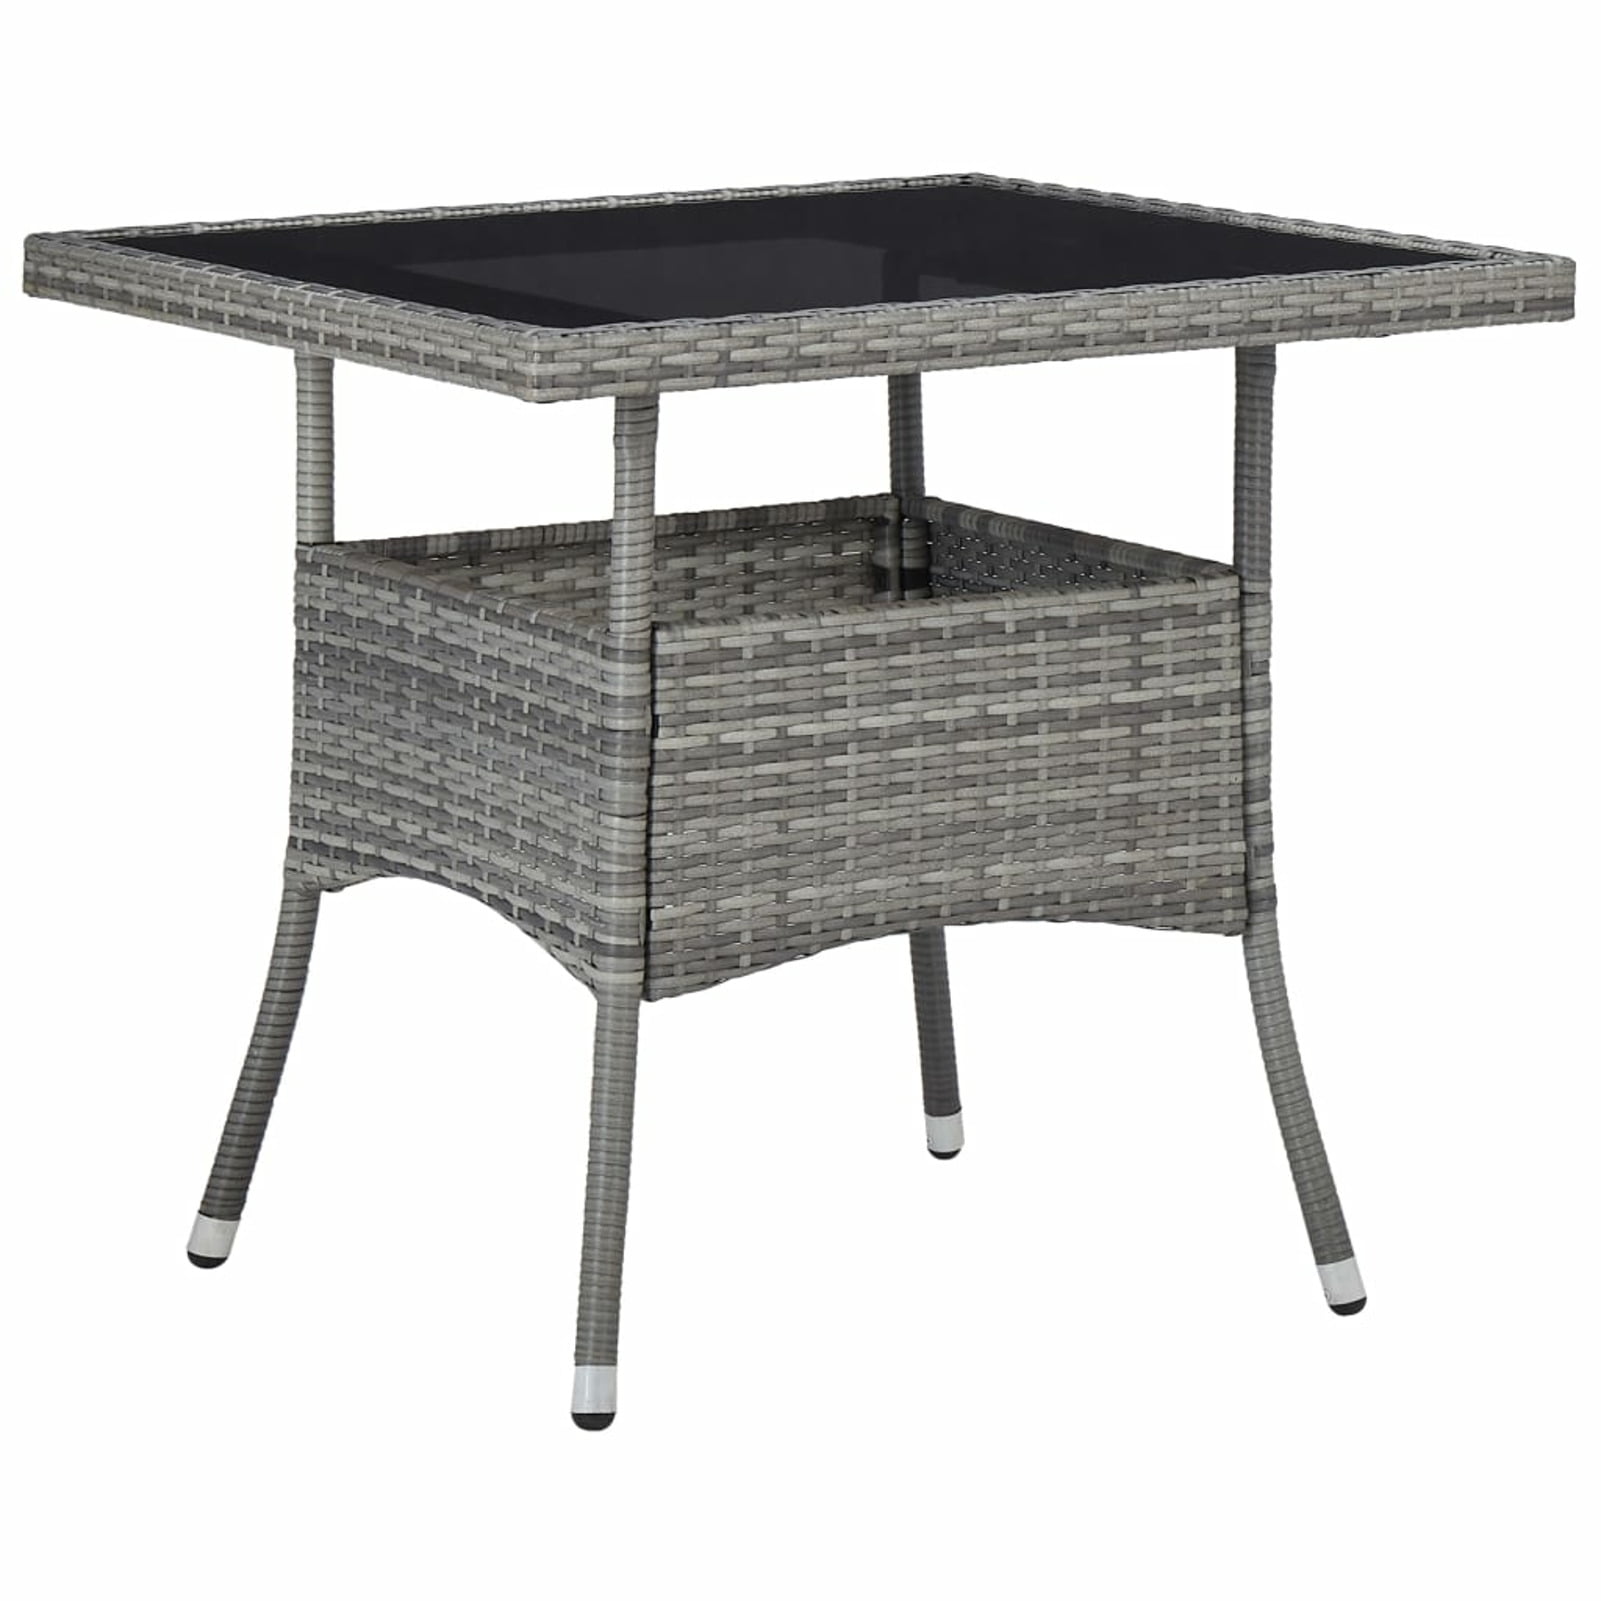 Garden Table Poly Rattan Dining Table Outdoor Patio Yard Lightweight table Grey